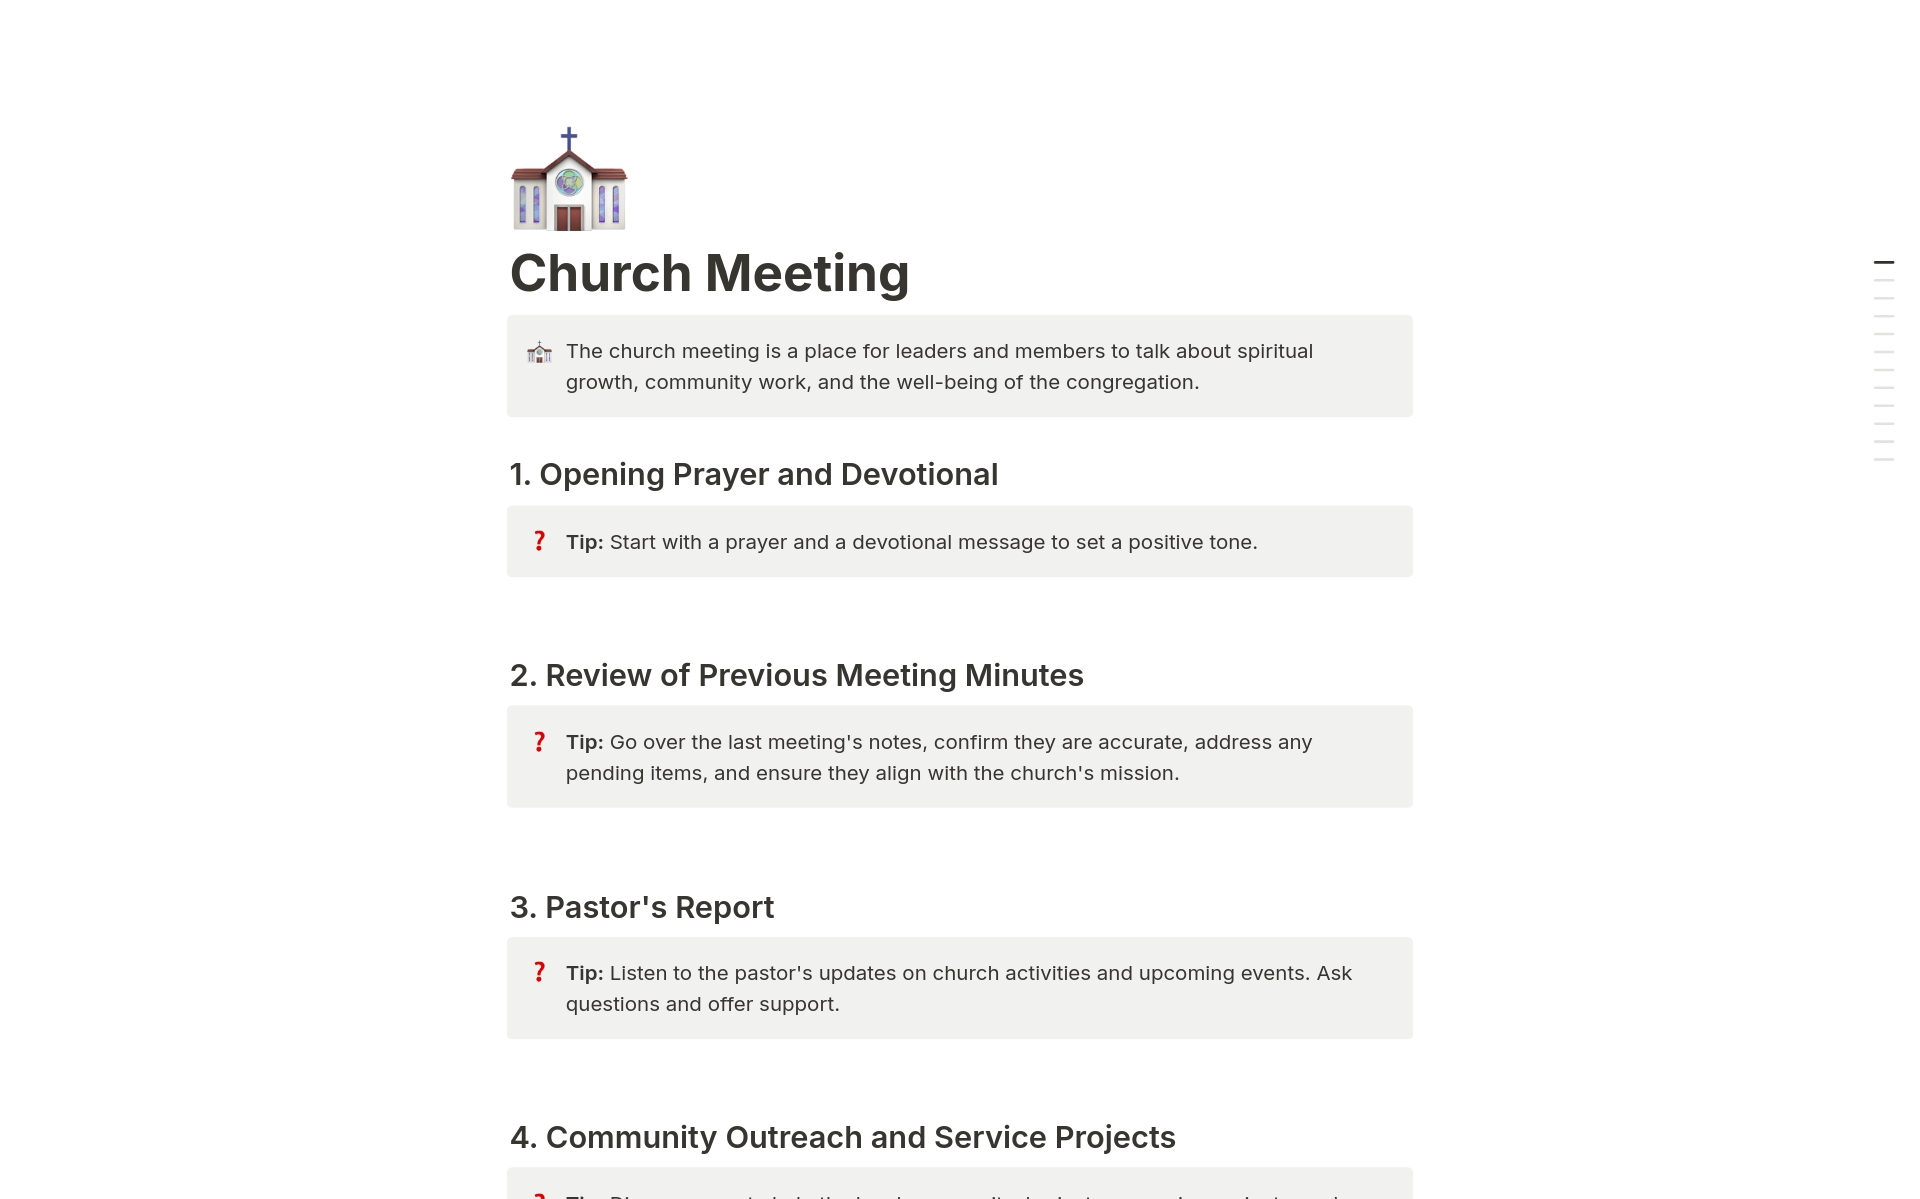 The church meeting is a place for leaders and members to talk about spiritual growth, community work, and the well-being of the congregation.